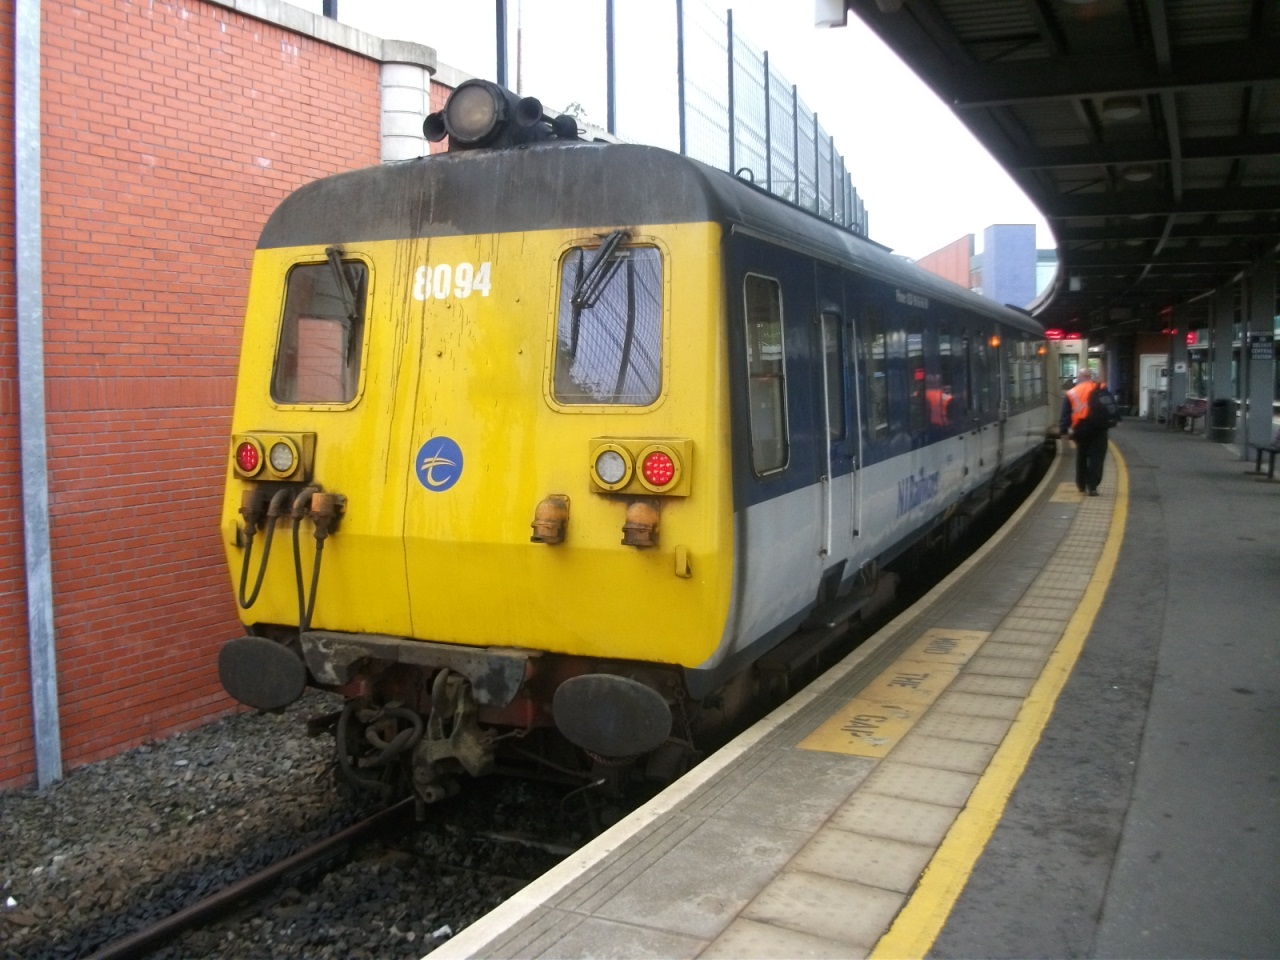 #14: Leaving the Best 'til Last, Part 1: NIR Thumper unit 8094 at Belfast Central, having finally made its appearance, conveniently for my last return